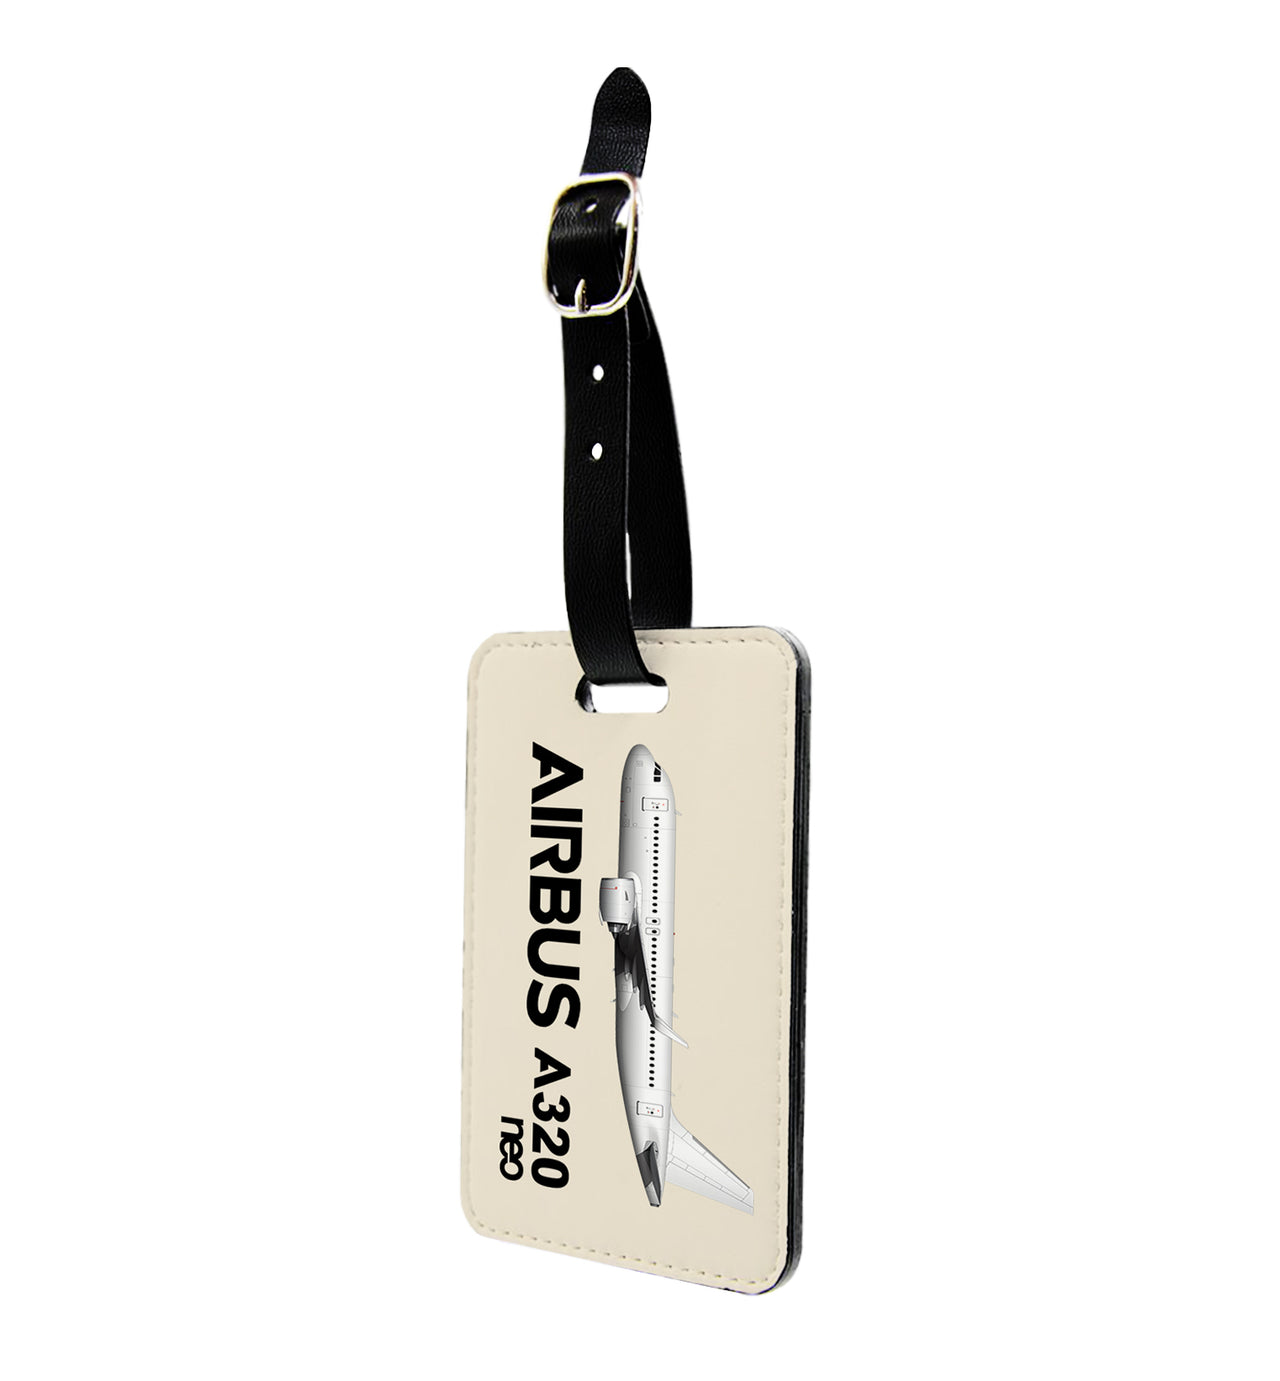 The Airbus A320Neo Designed Luggage Tag